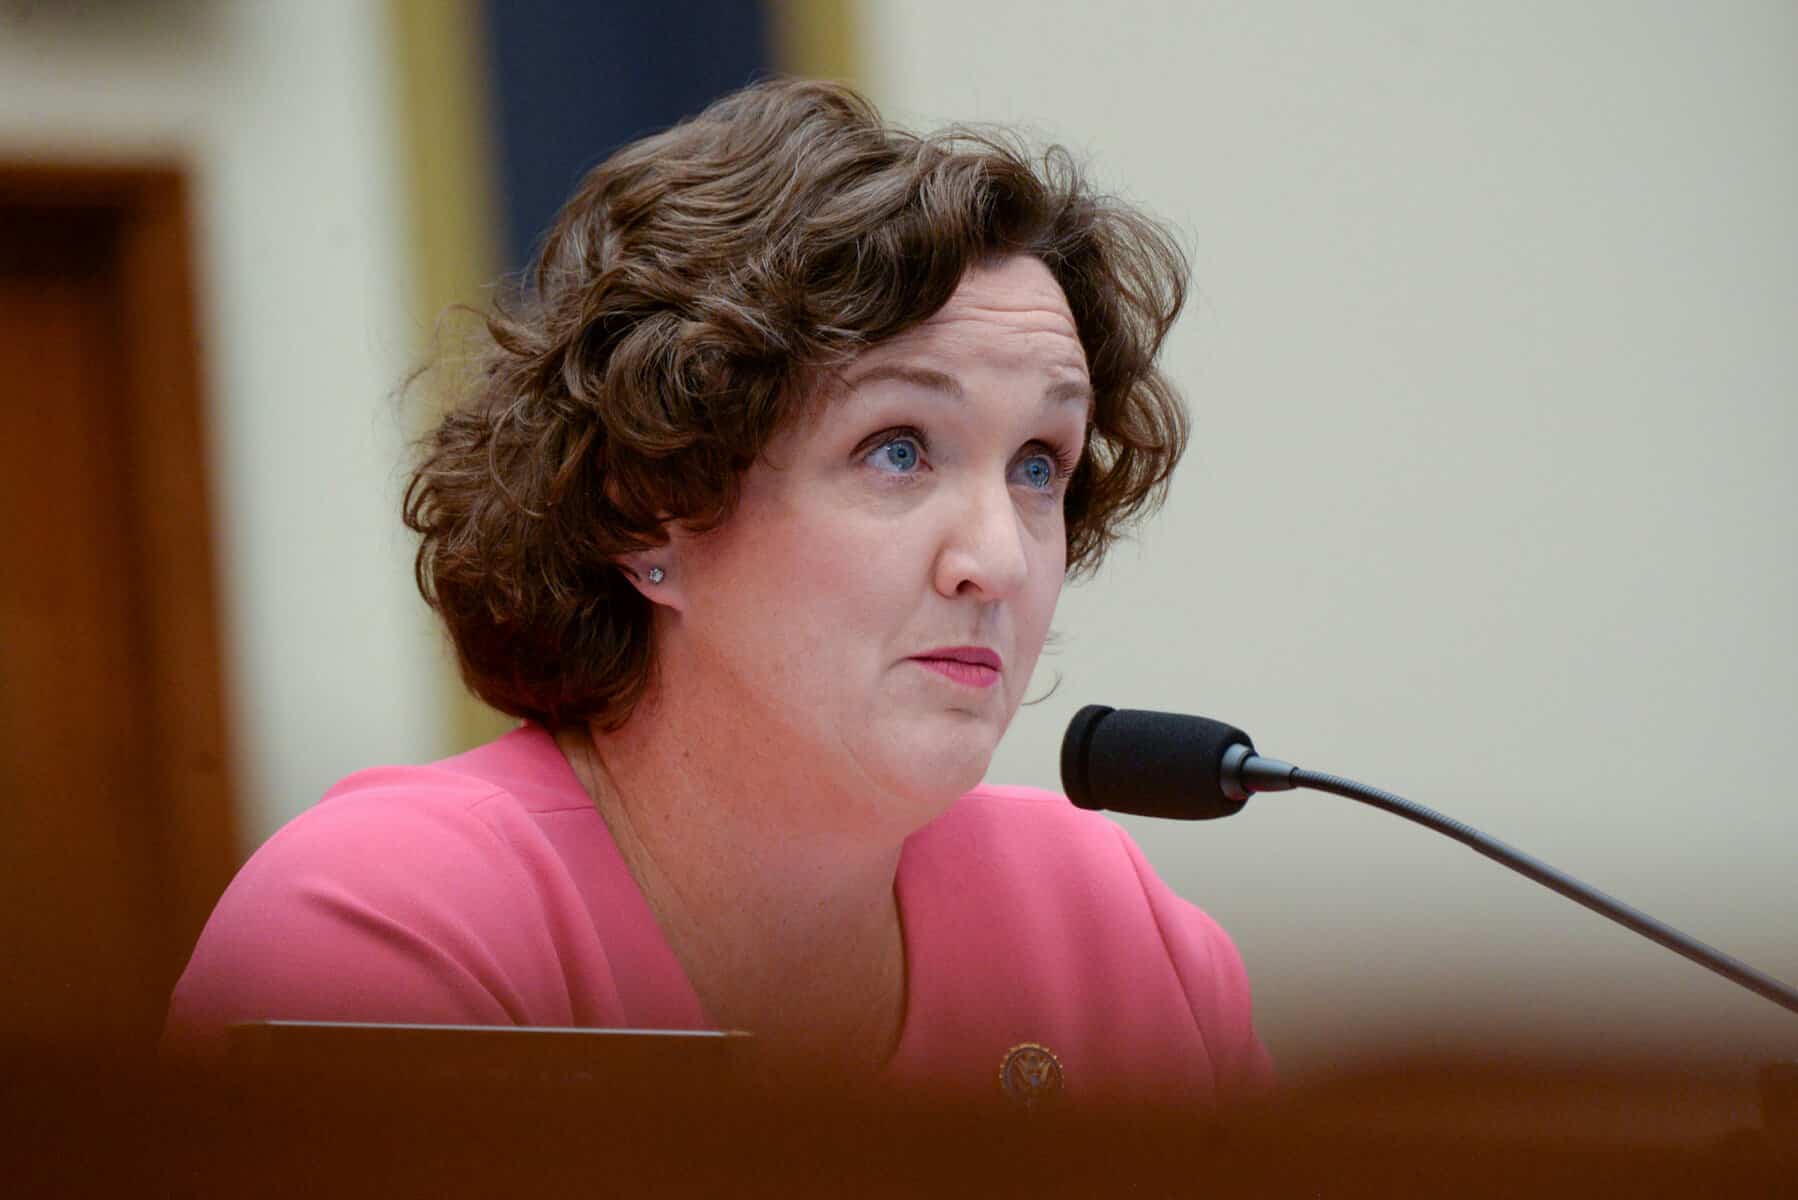 rep.-katie-porter-takes-back-rigged-election-comments